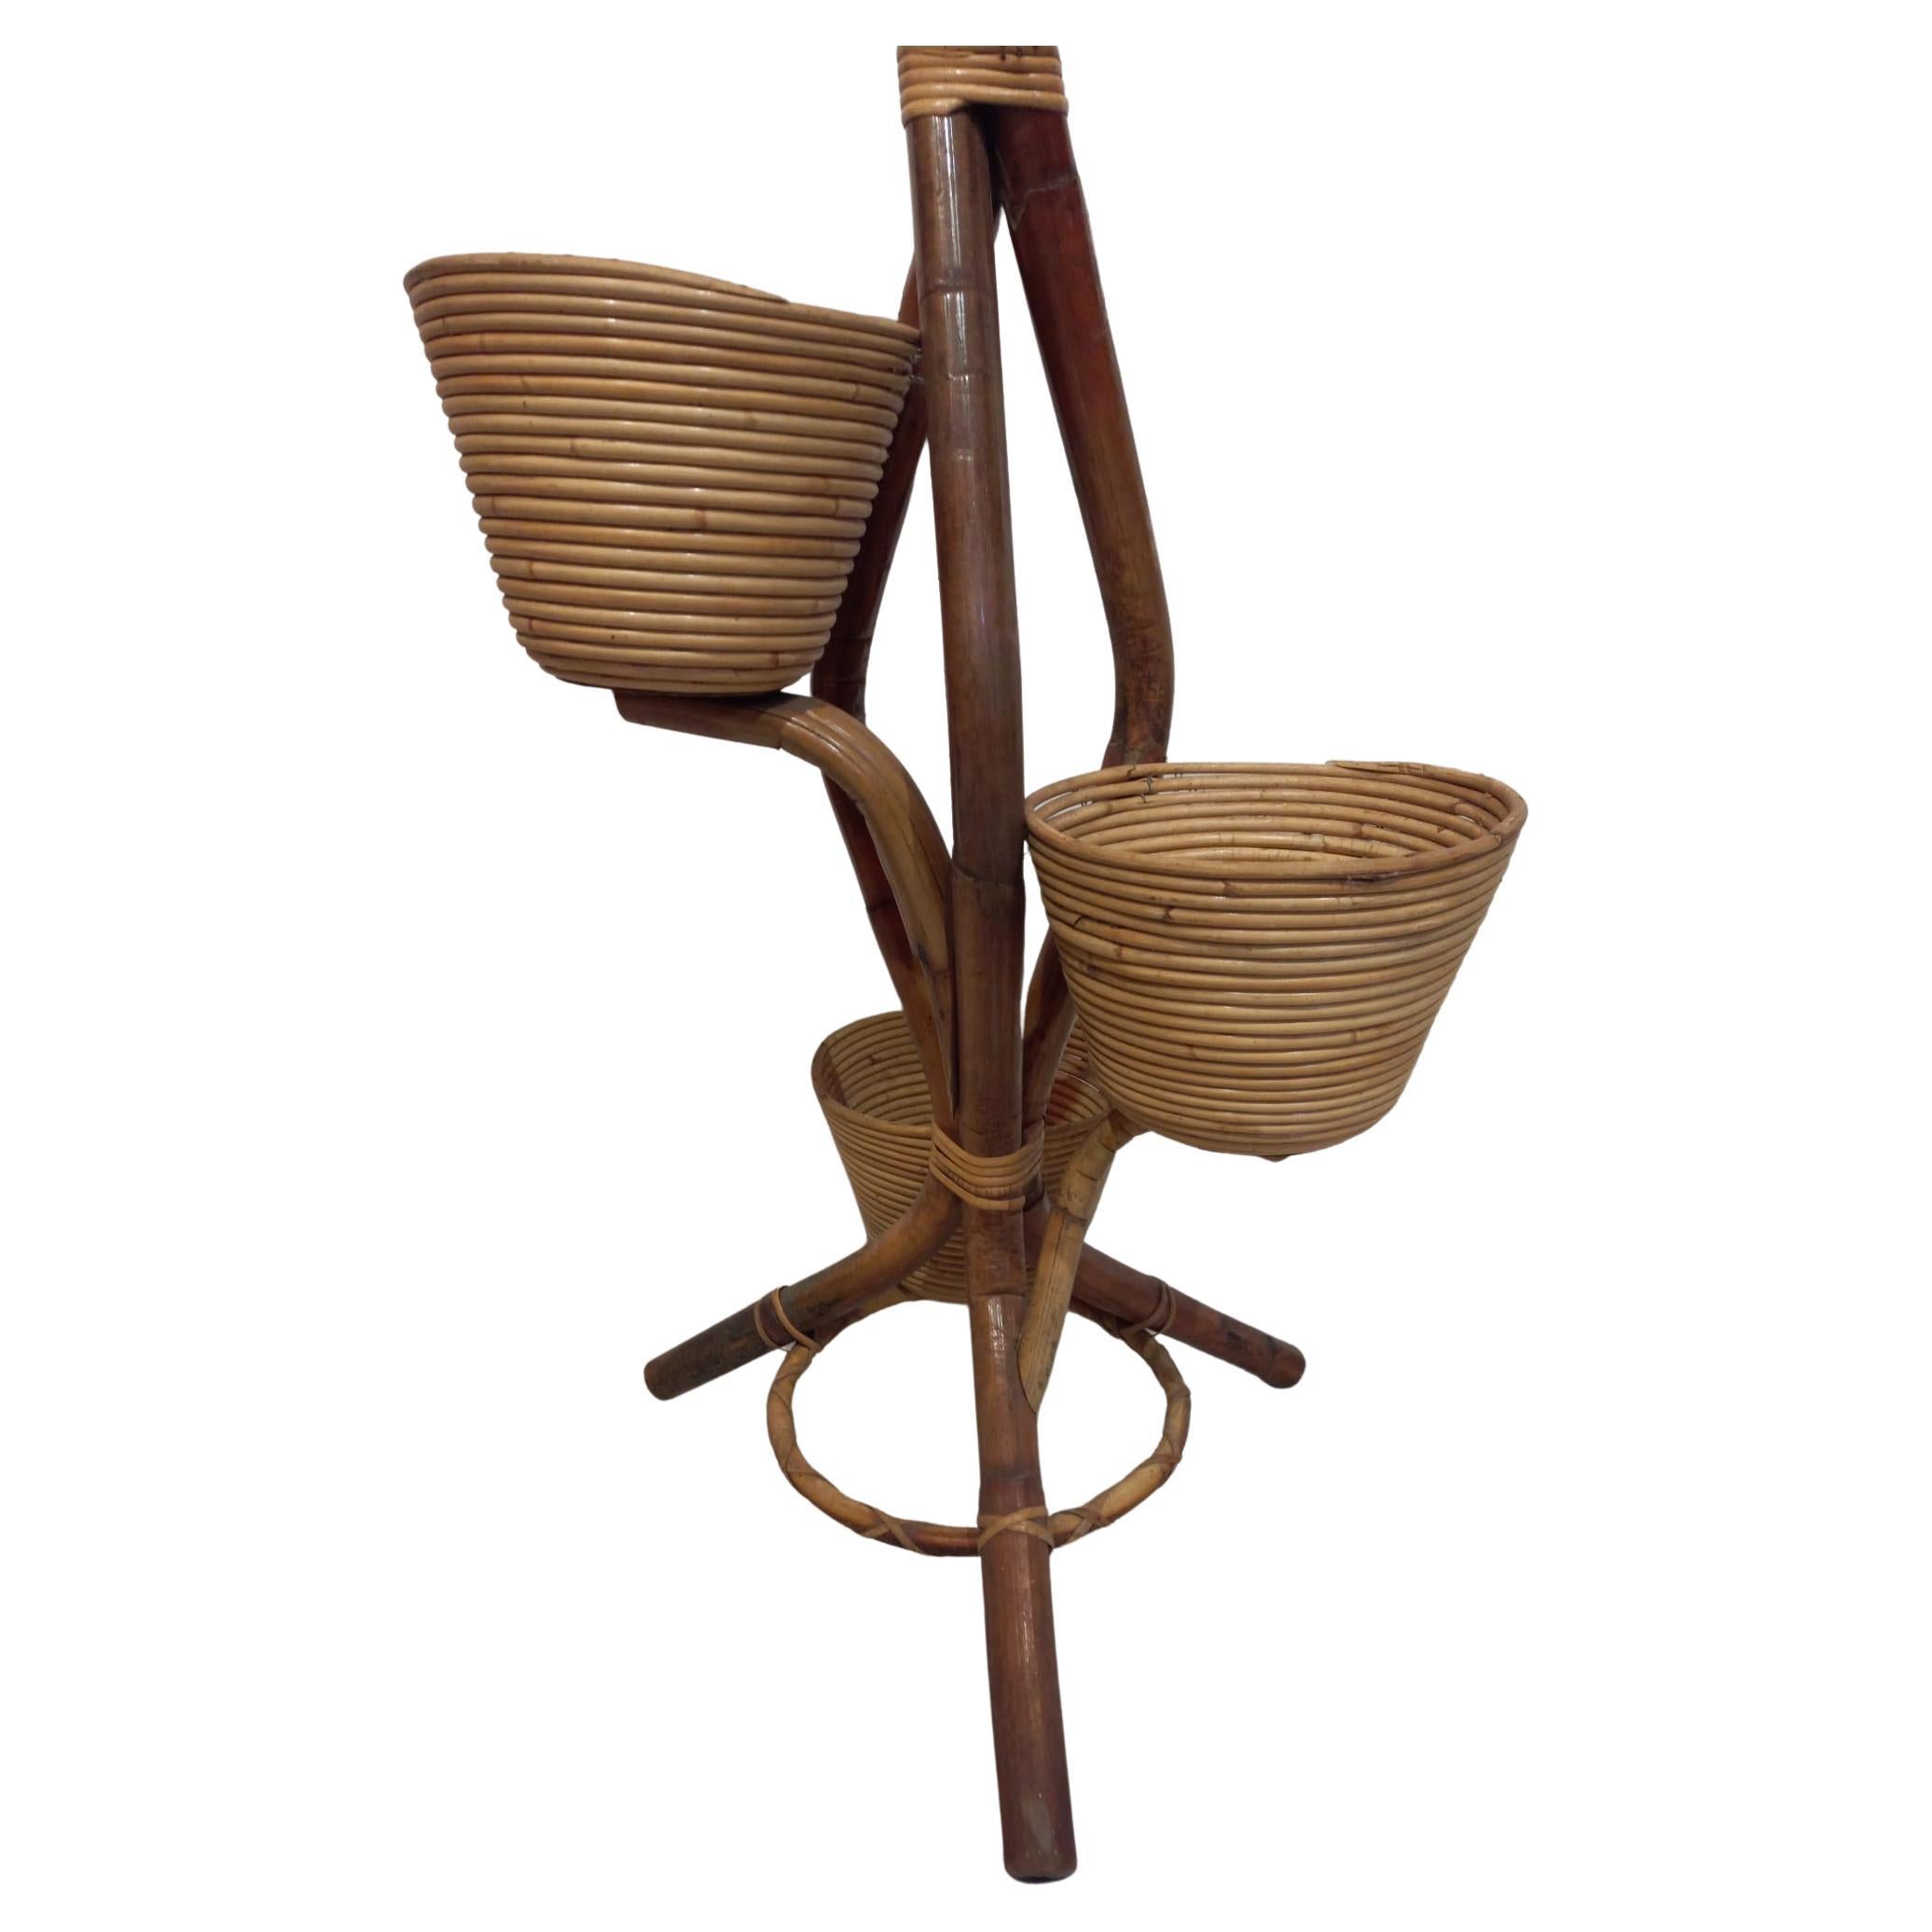 1960s vintage bamboo and rattan flower stand from Italy In Good Condition For Sale In Vienna, AT